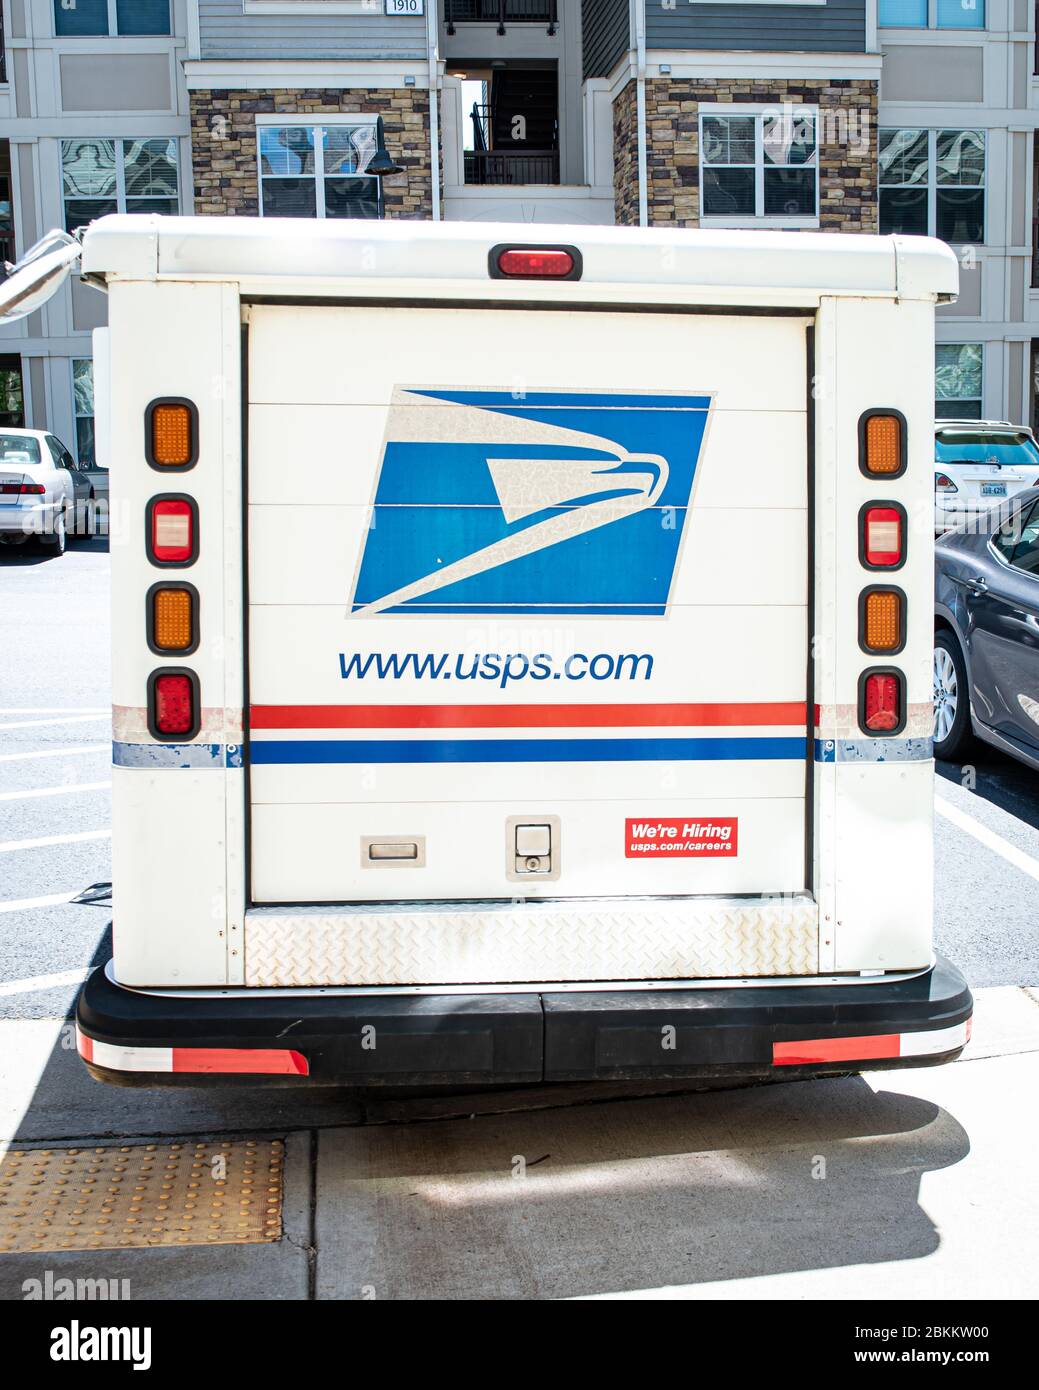 Charlottesville, Virginia , United States May 4, 2020 Postal Service truck parked in apartment complex on sunny day Stock Photo